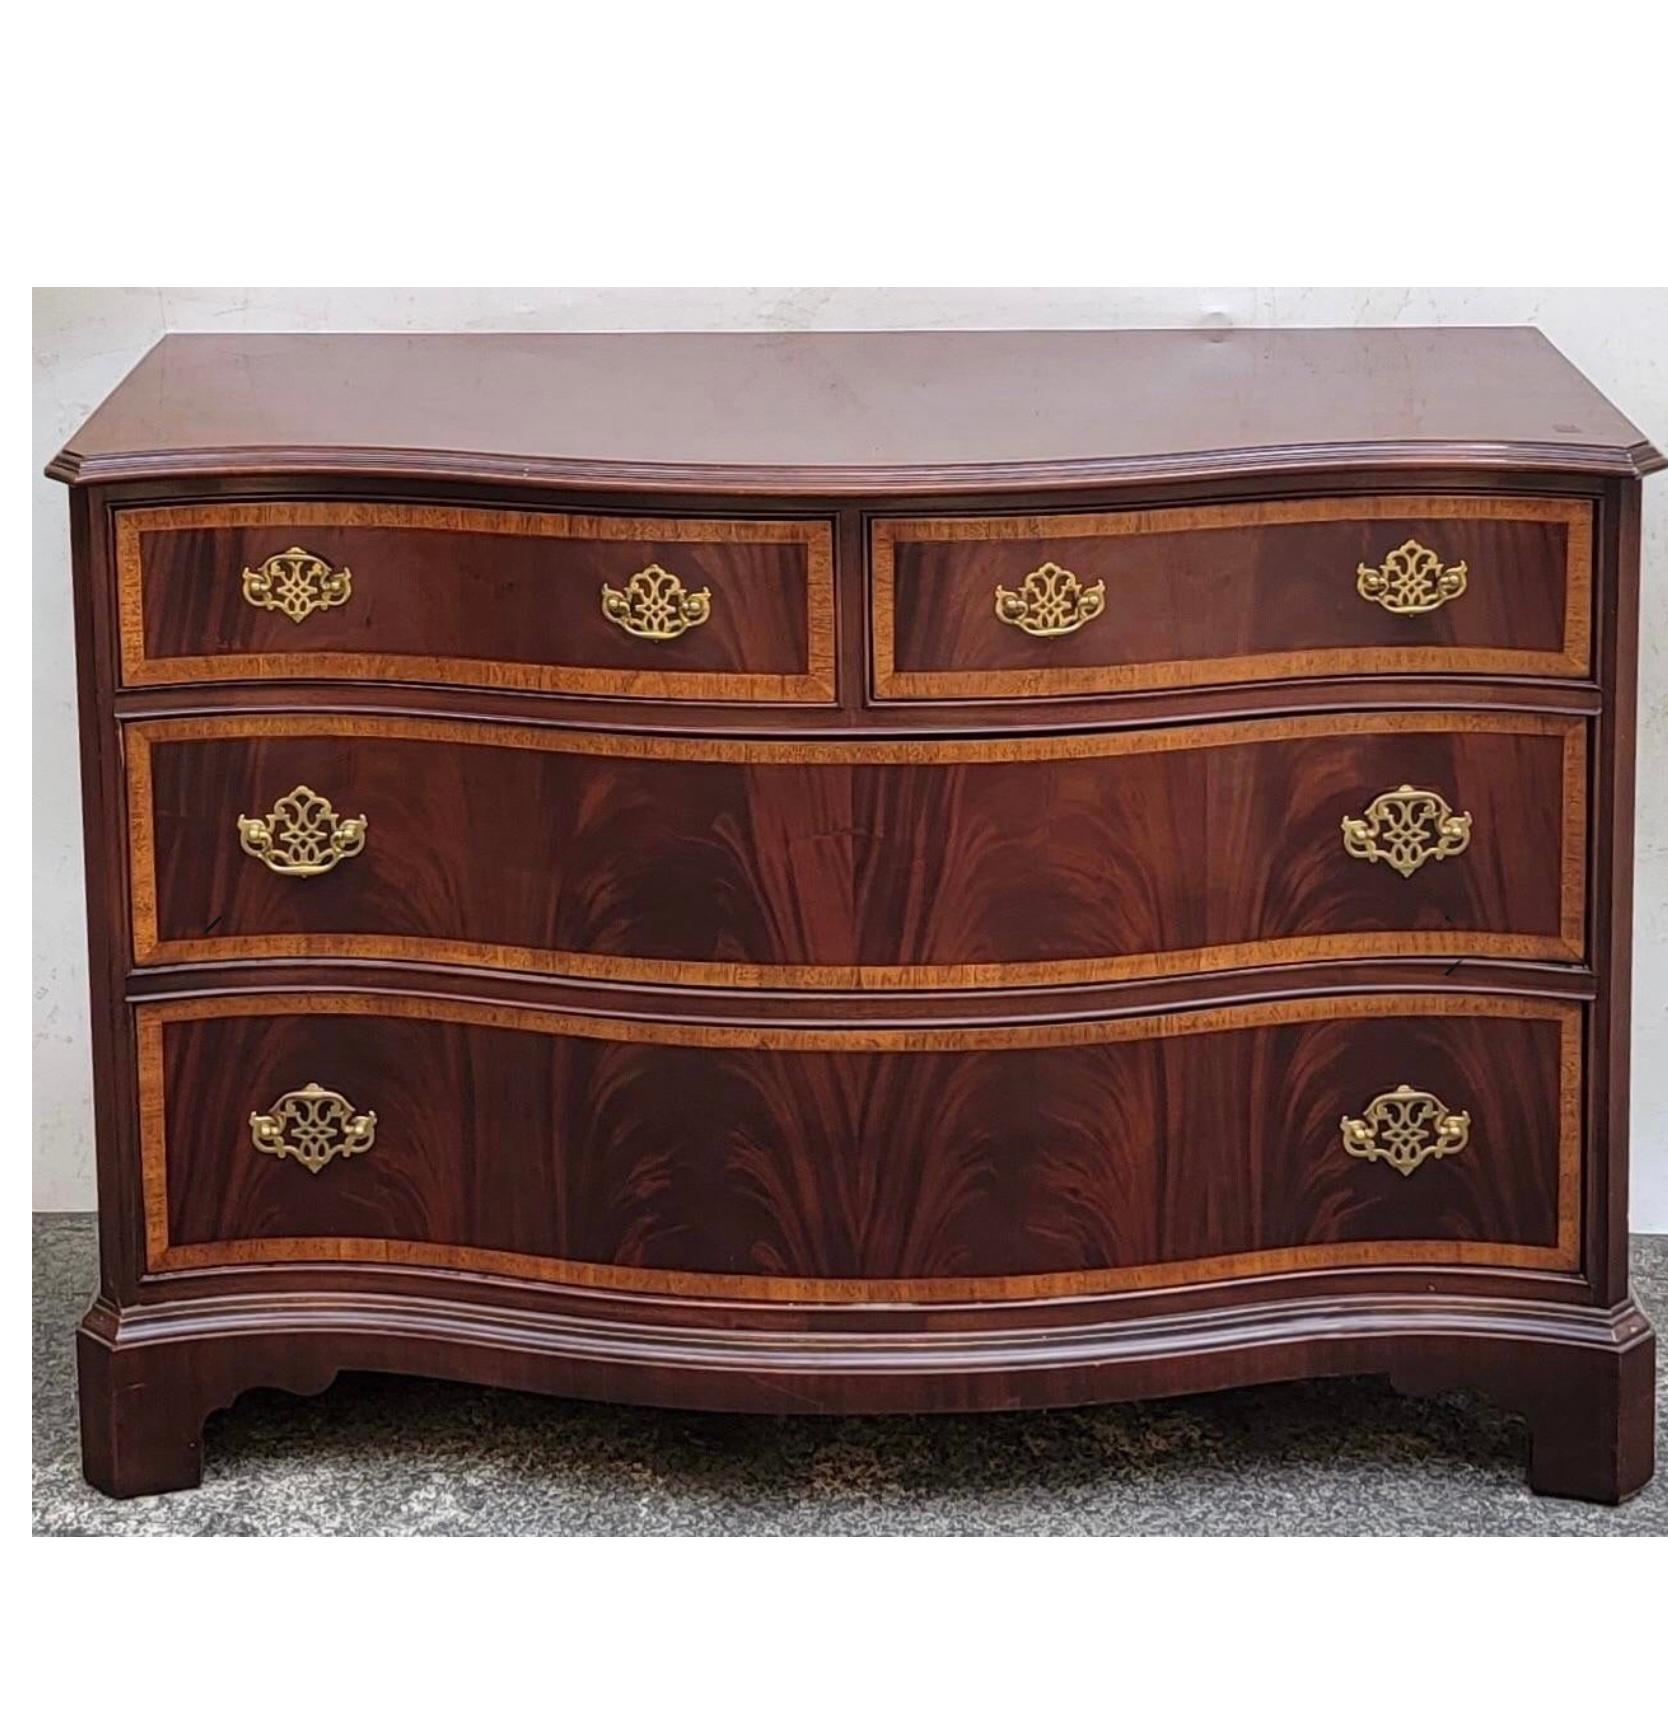 Hickory Furniture Chippendale Style Flame Mahogany Serpentine Chest - Pair In Good Condition For Sale In Kennesaw, GA